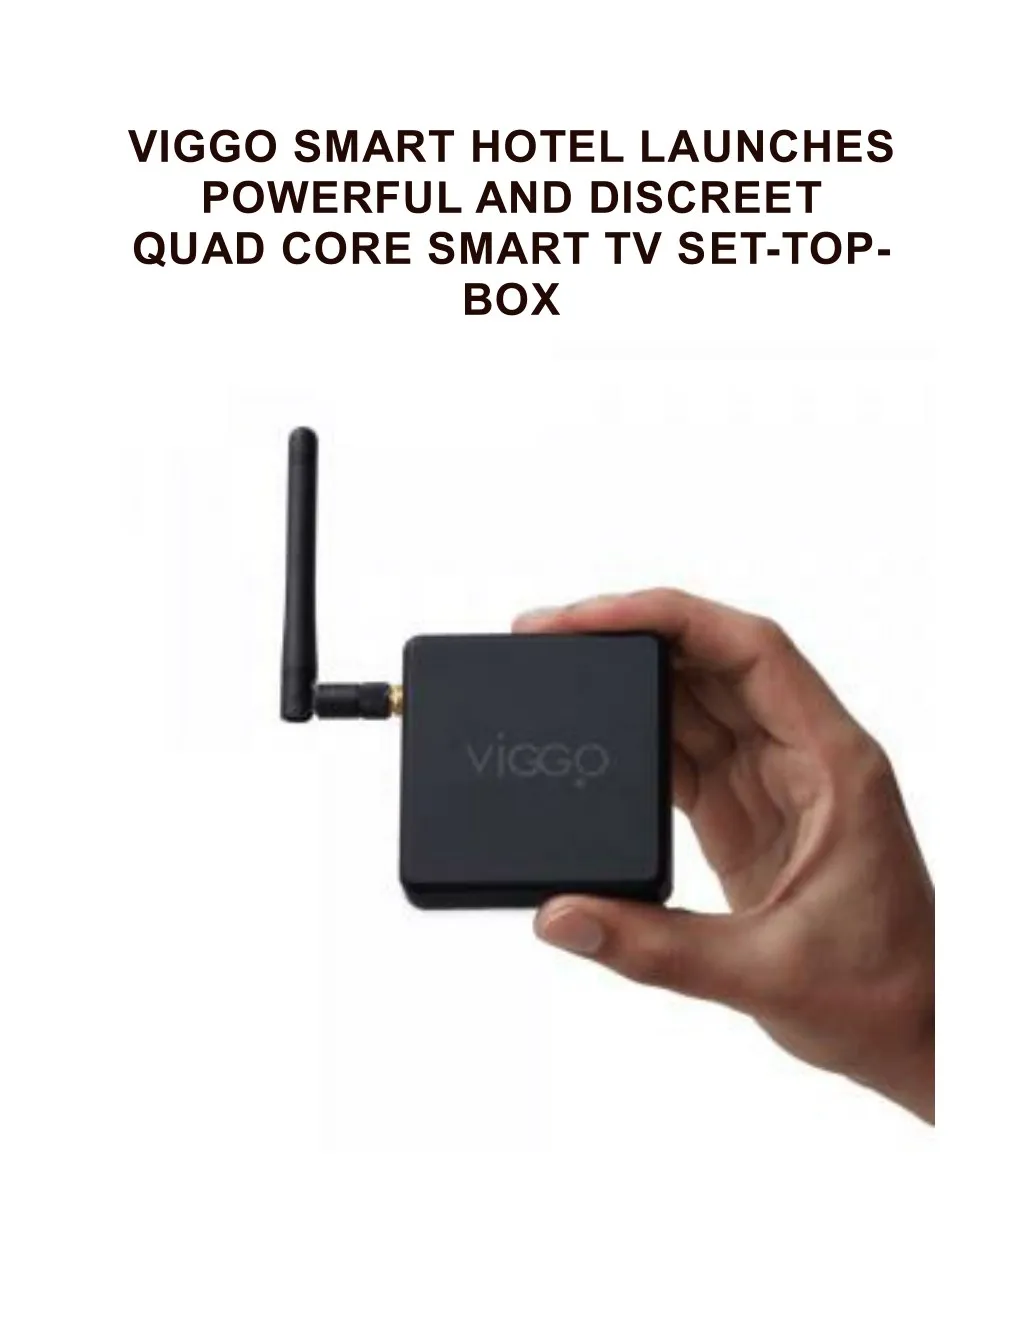 viggo smart hotel launches powerful and discreet